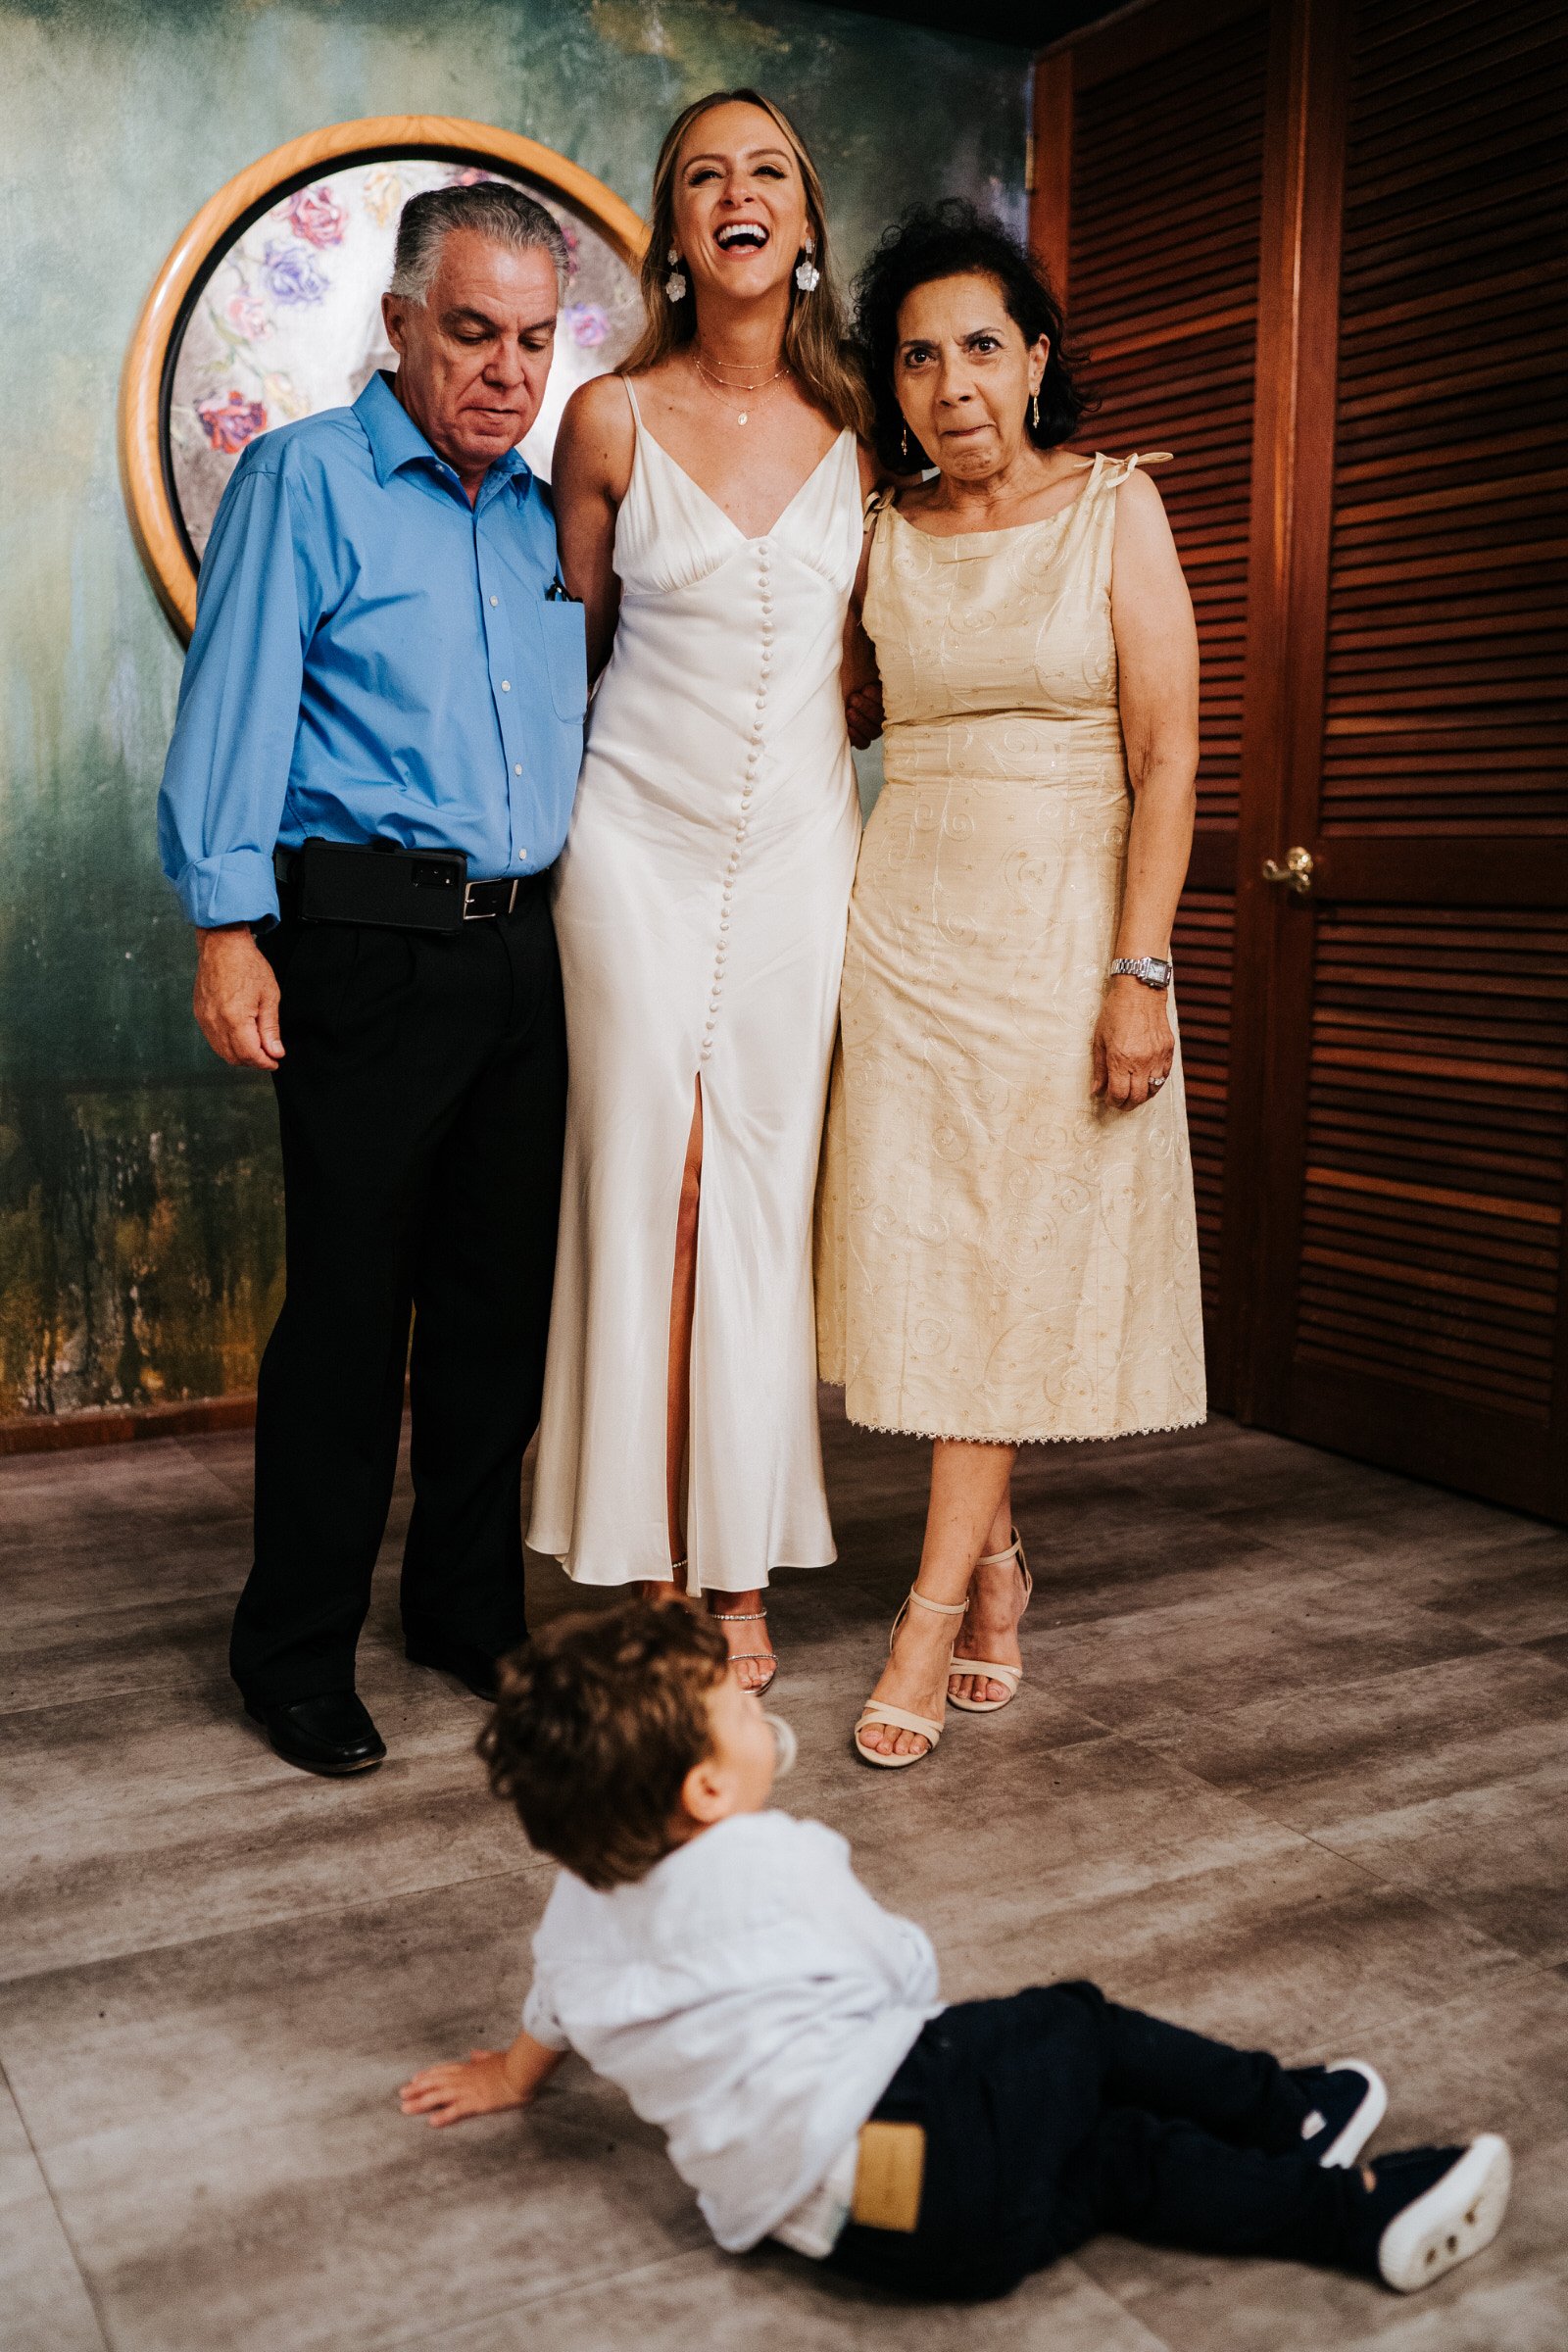 Little boy throws himself onto the ground as bride has her photograph taken with her parents. Bride is seen smiling at Puerto Rico El Convento wedding